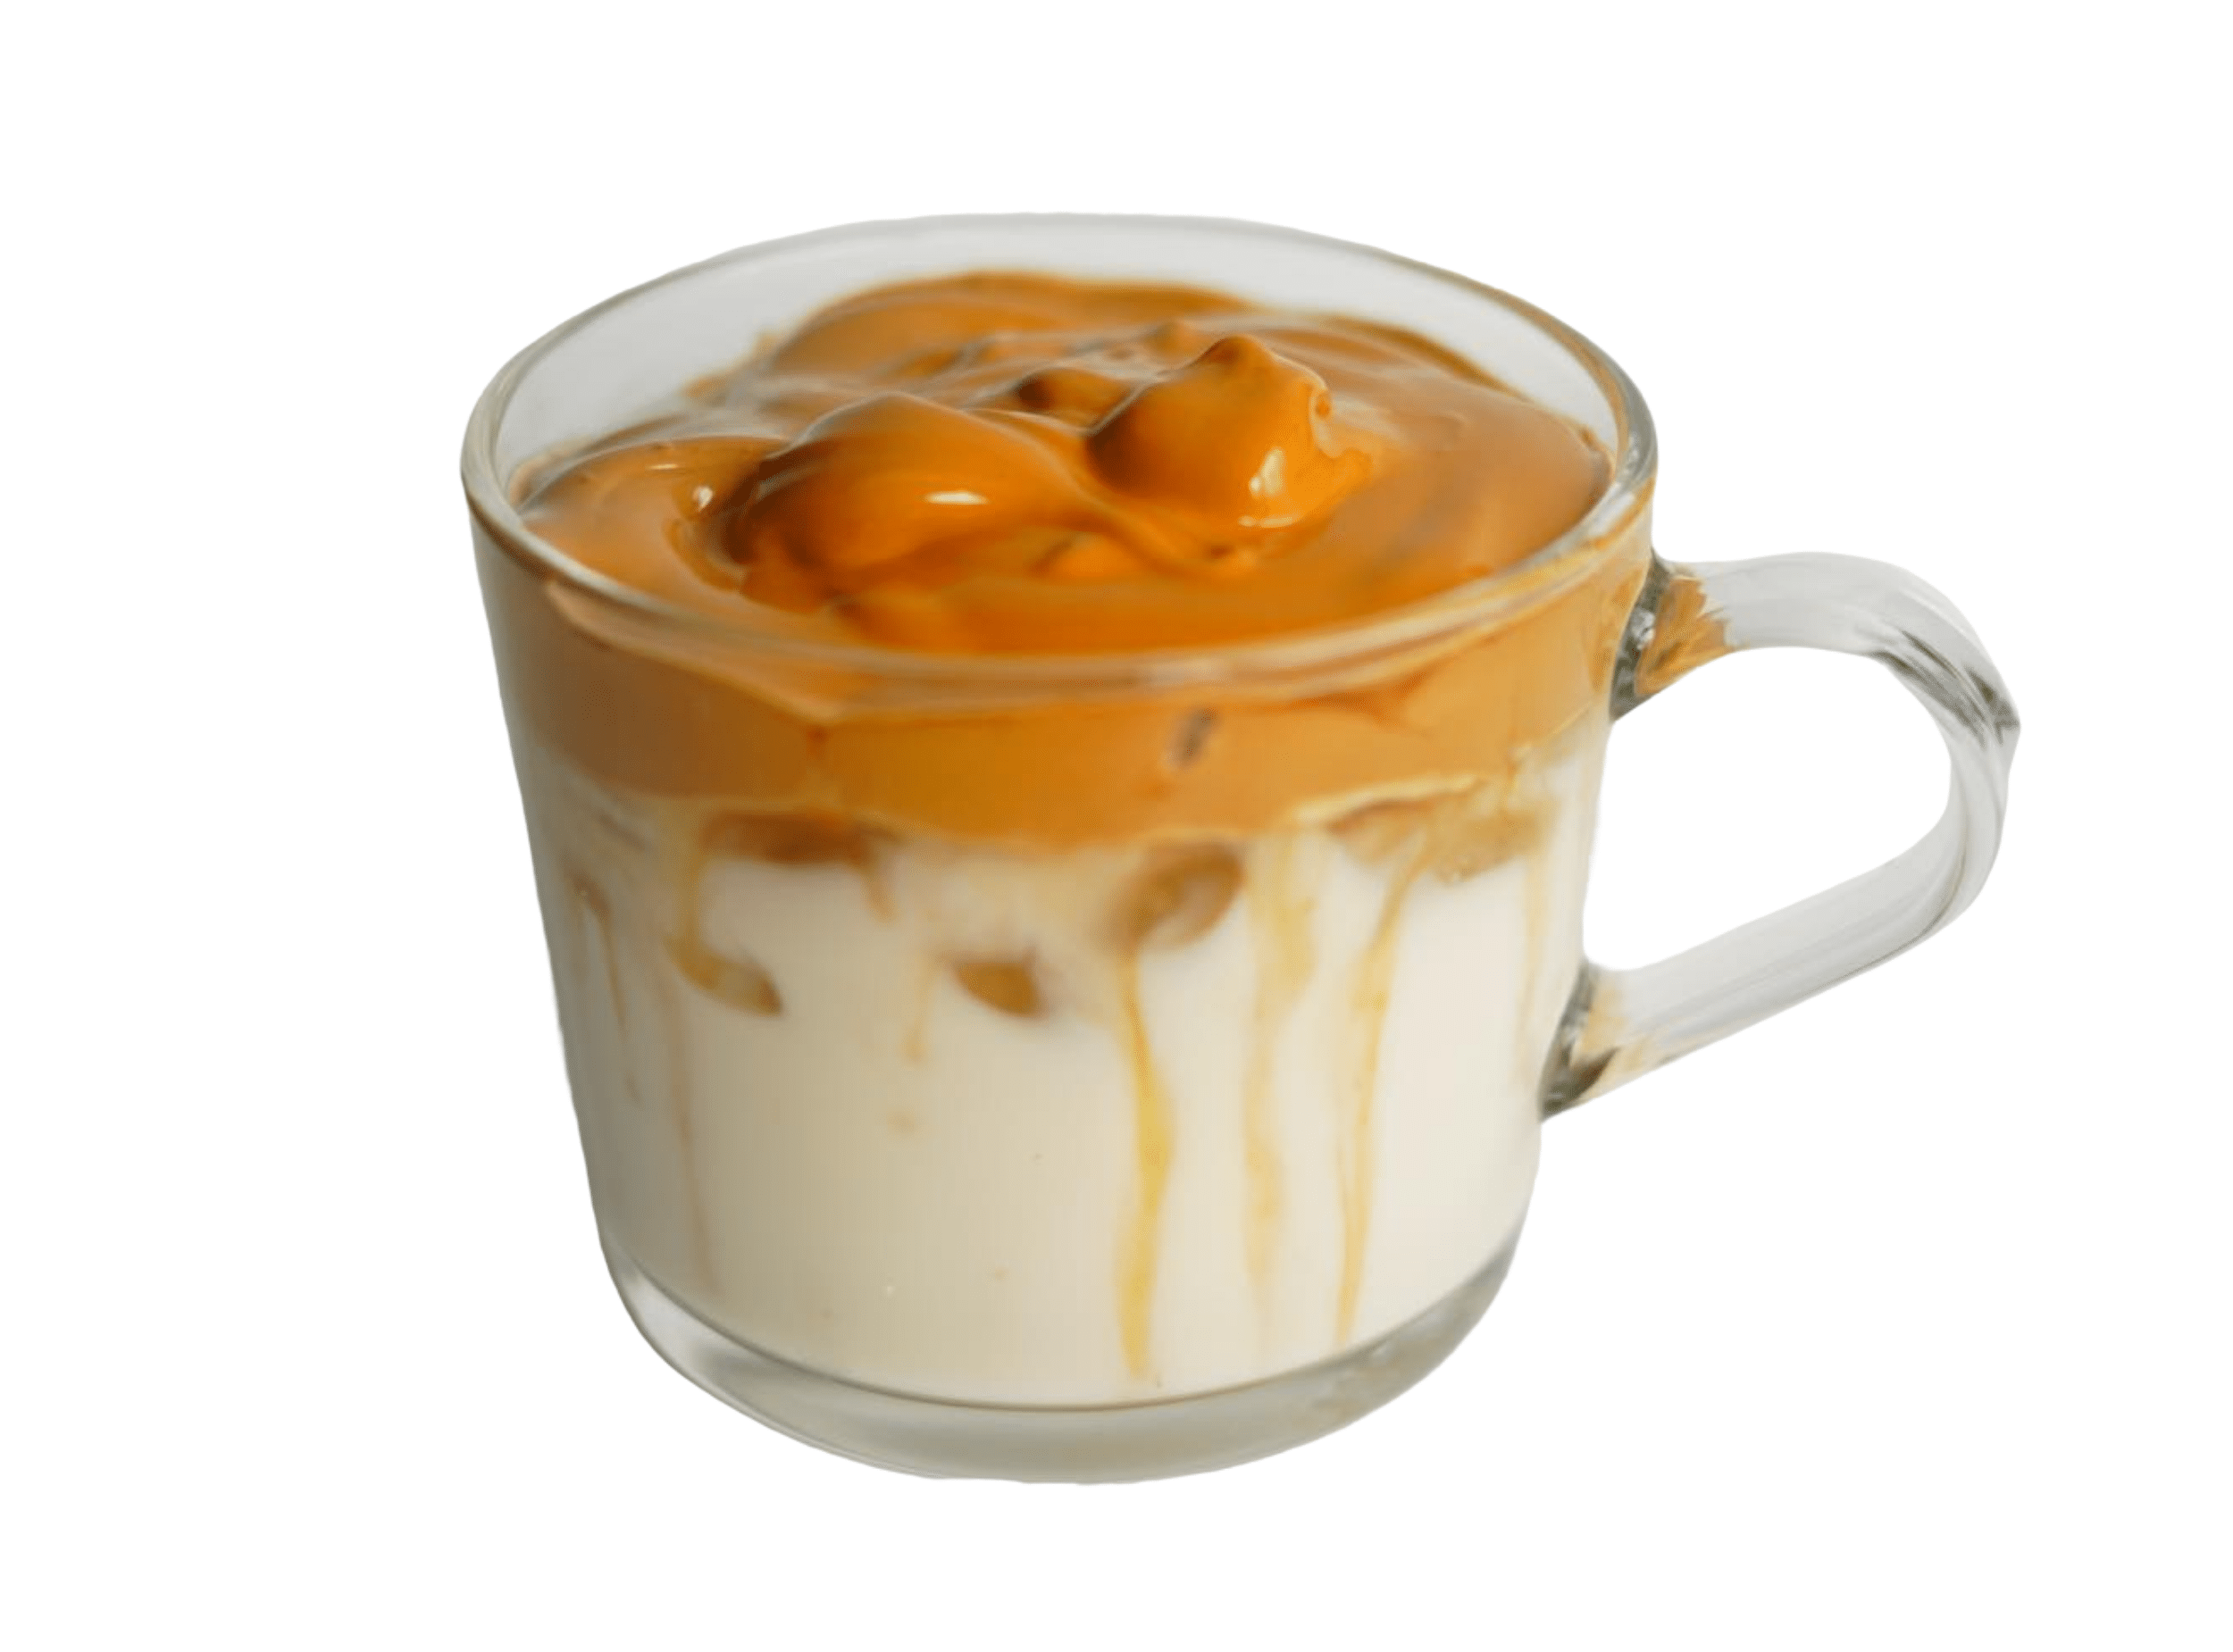 https://plantyou.com/wp-content/uploads/2020/03/whipped-coffee.png